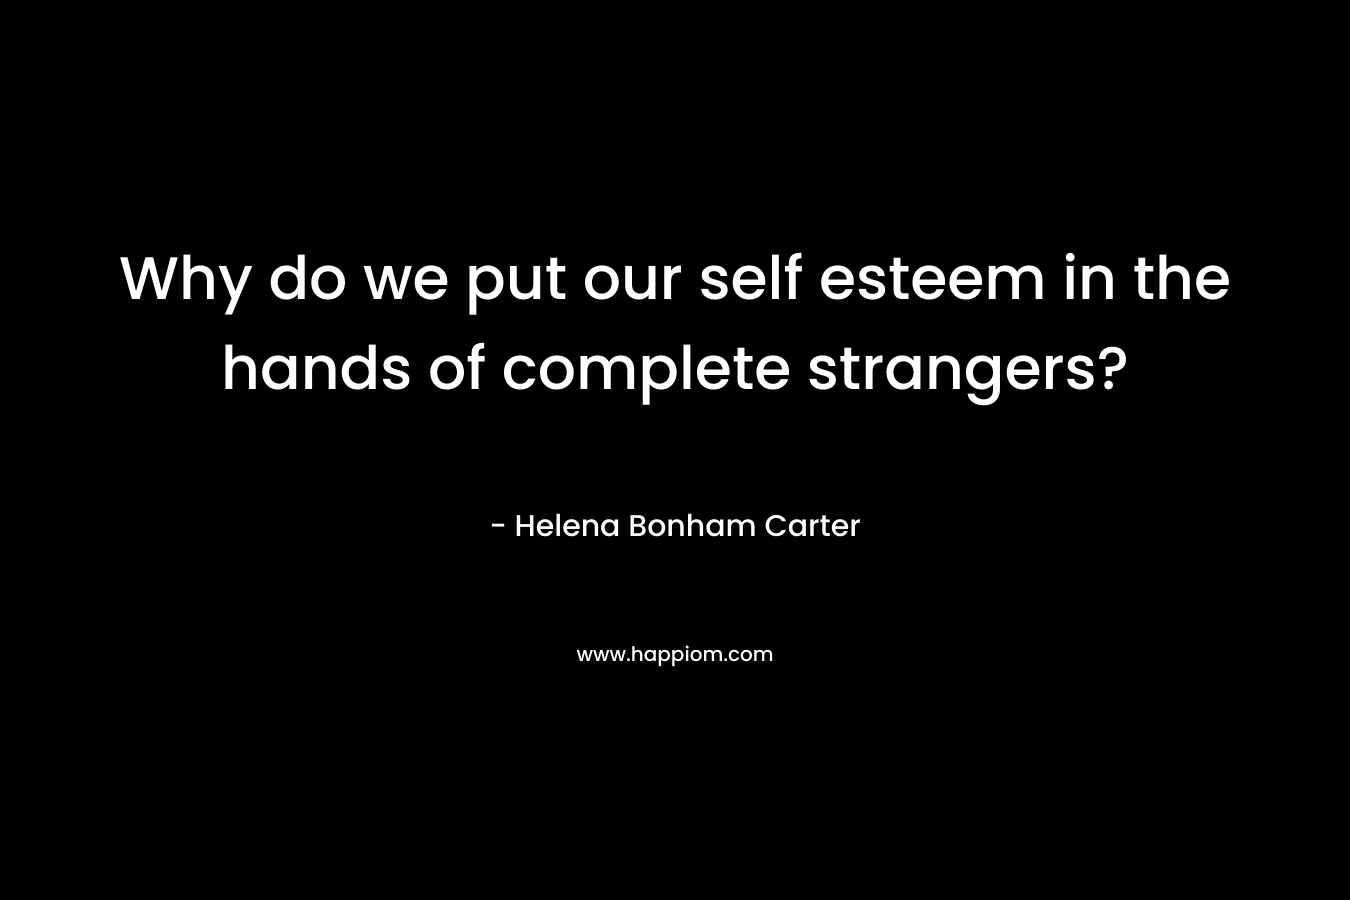  Why do we put our self esteem in the hands of complete strangers? 